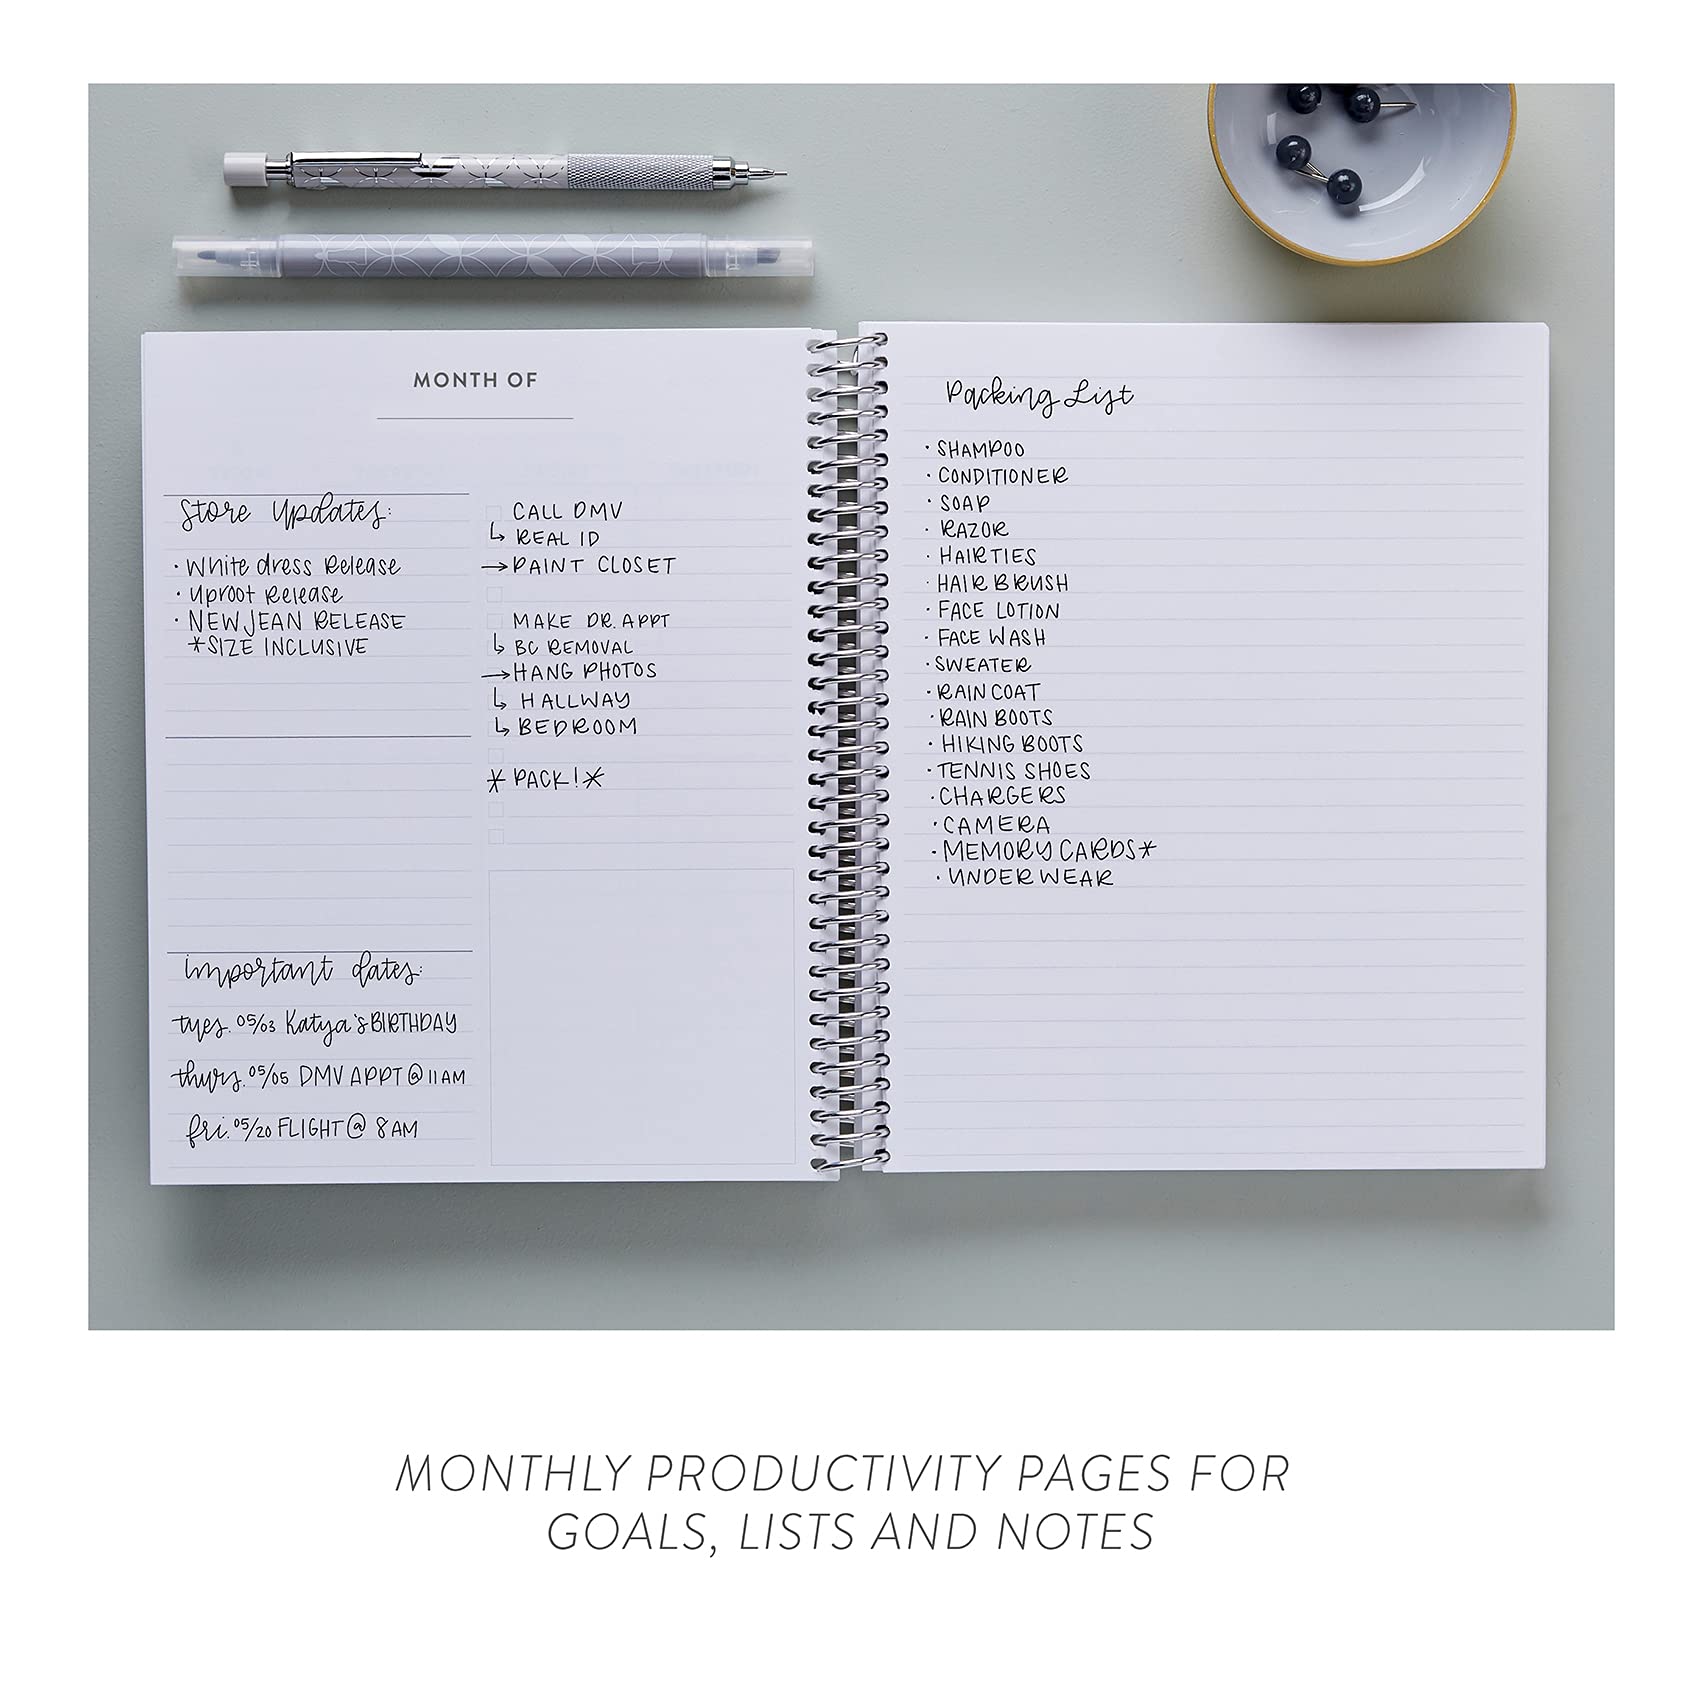 Undated Weekly Planner 7" x 9" Coiled 12 Months - Focused Edition | Slate Blue Vegan Leather Cover, 80Lb Mohawk Paper | 160 Pgs w/ 2-Page Monthly Calendar Spreads, by Erin Condren